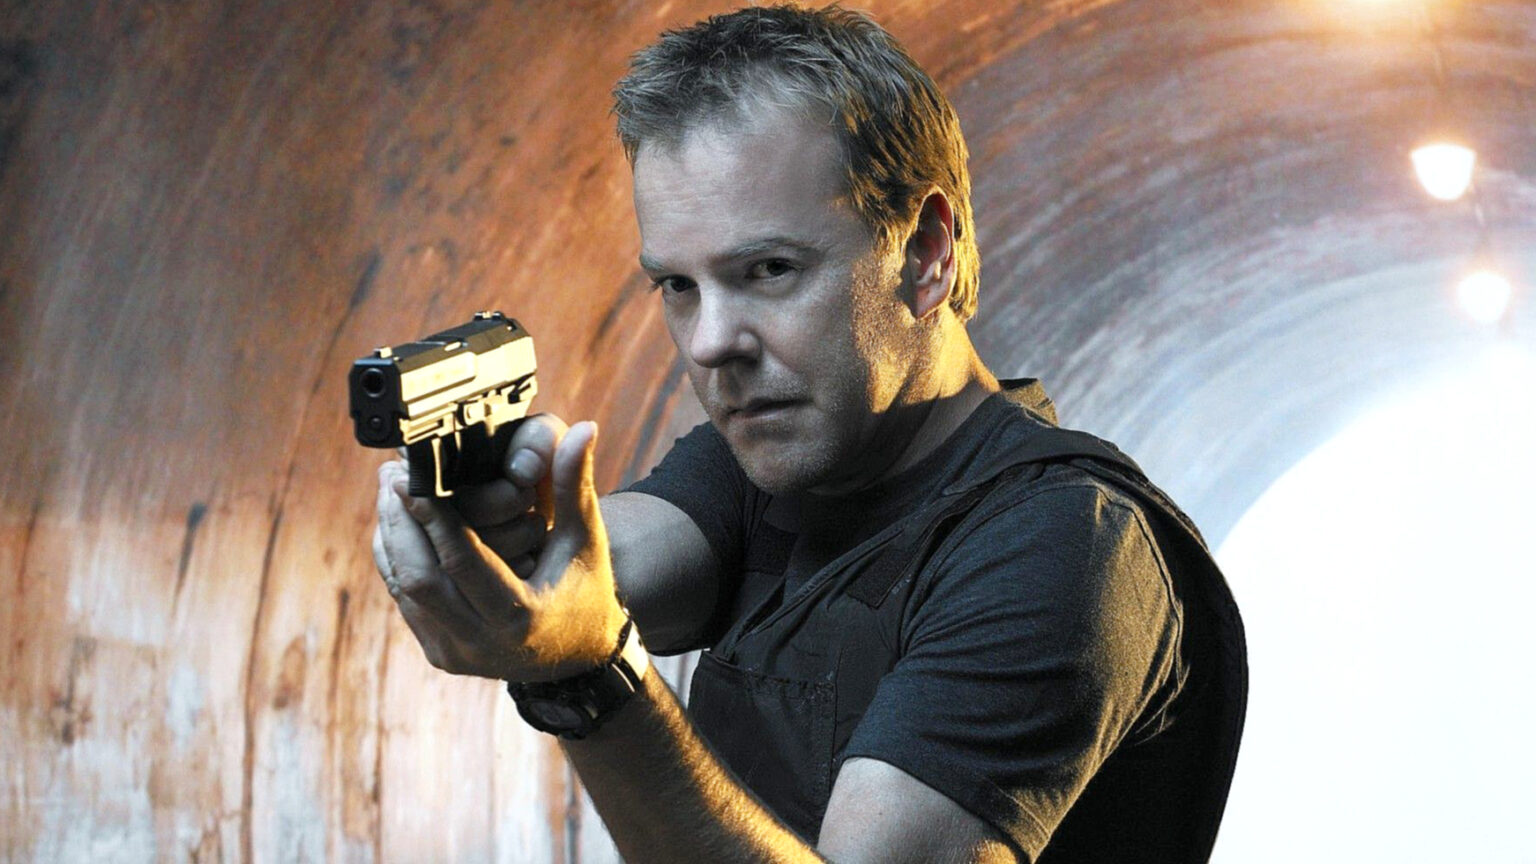 The Kiefer Sutherland Horror Movie On Streaming That Will Make You